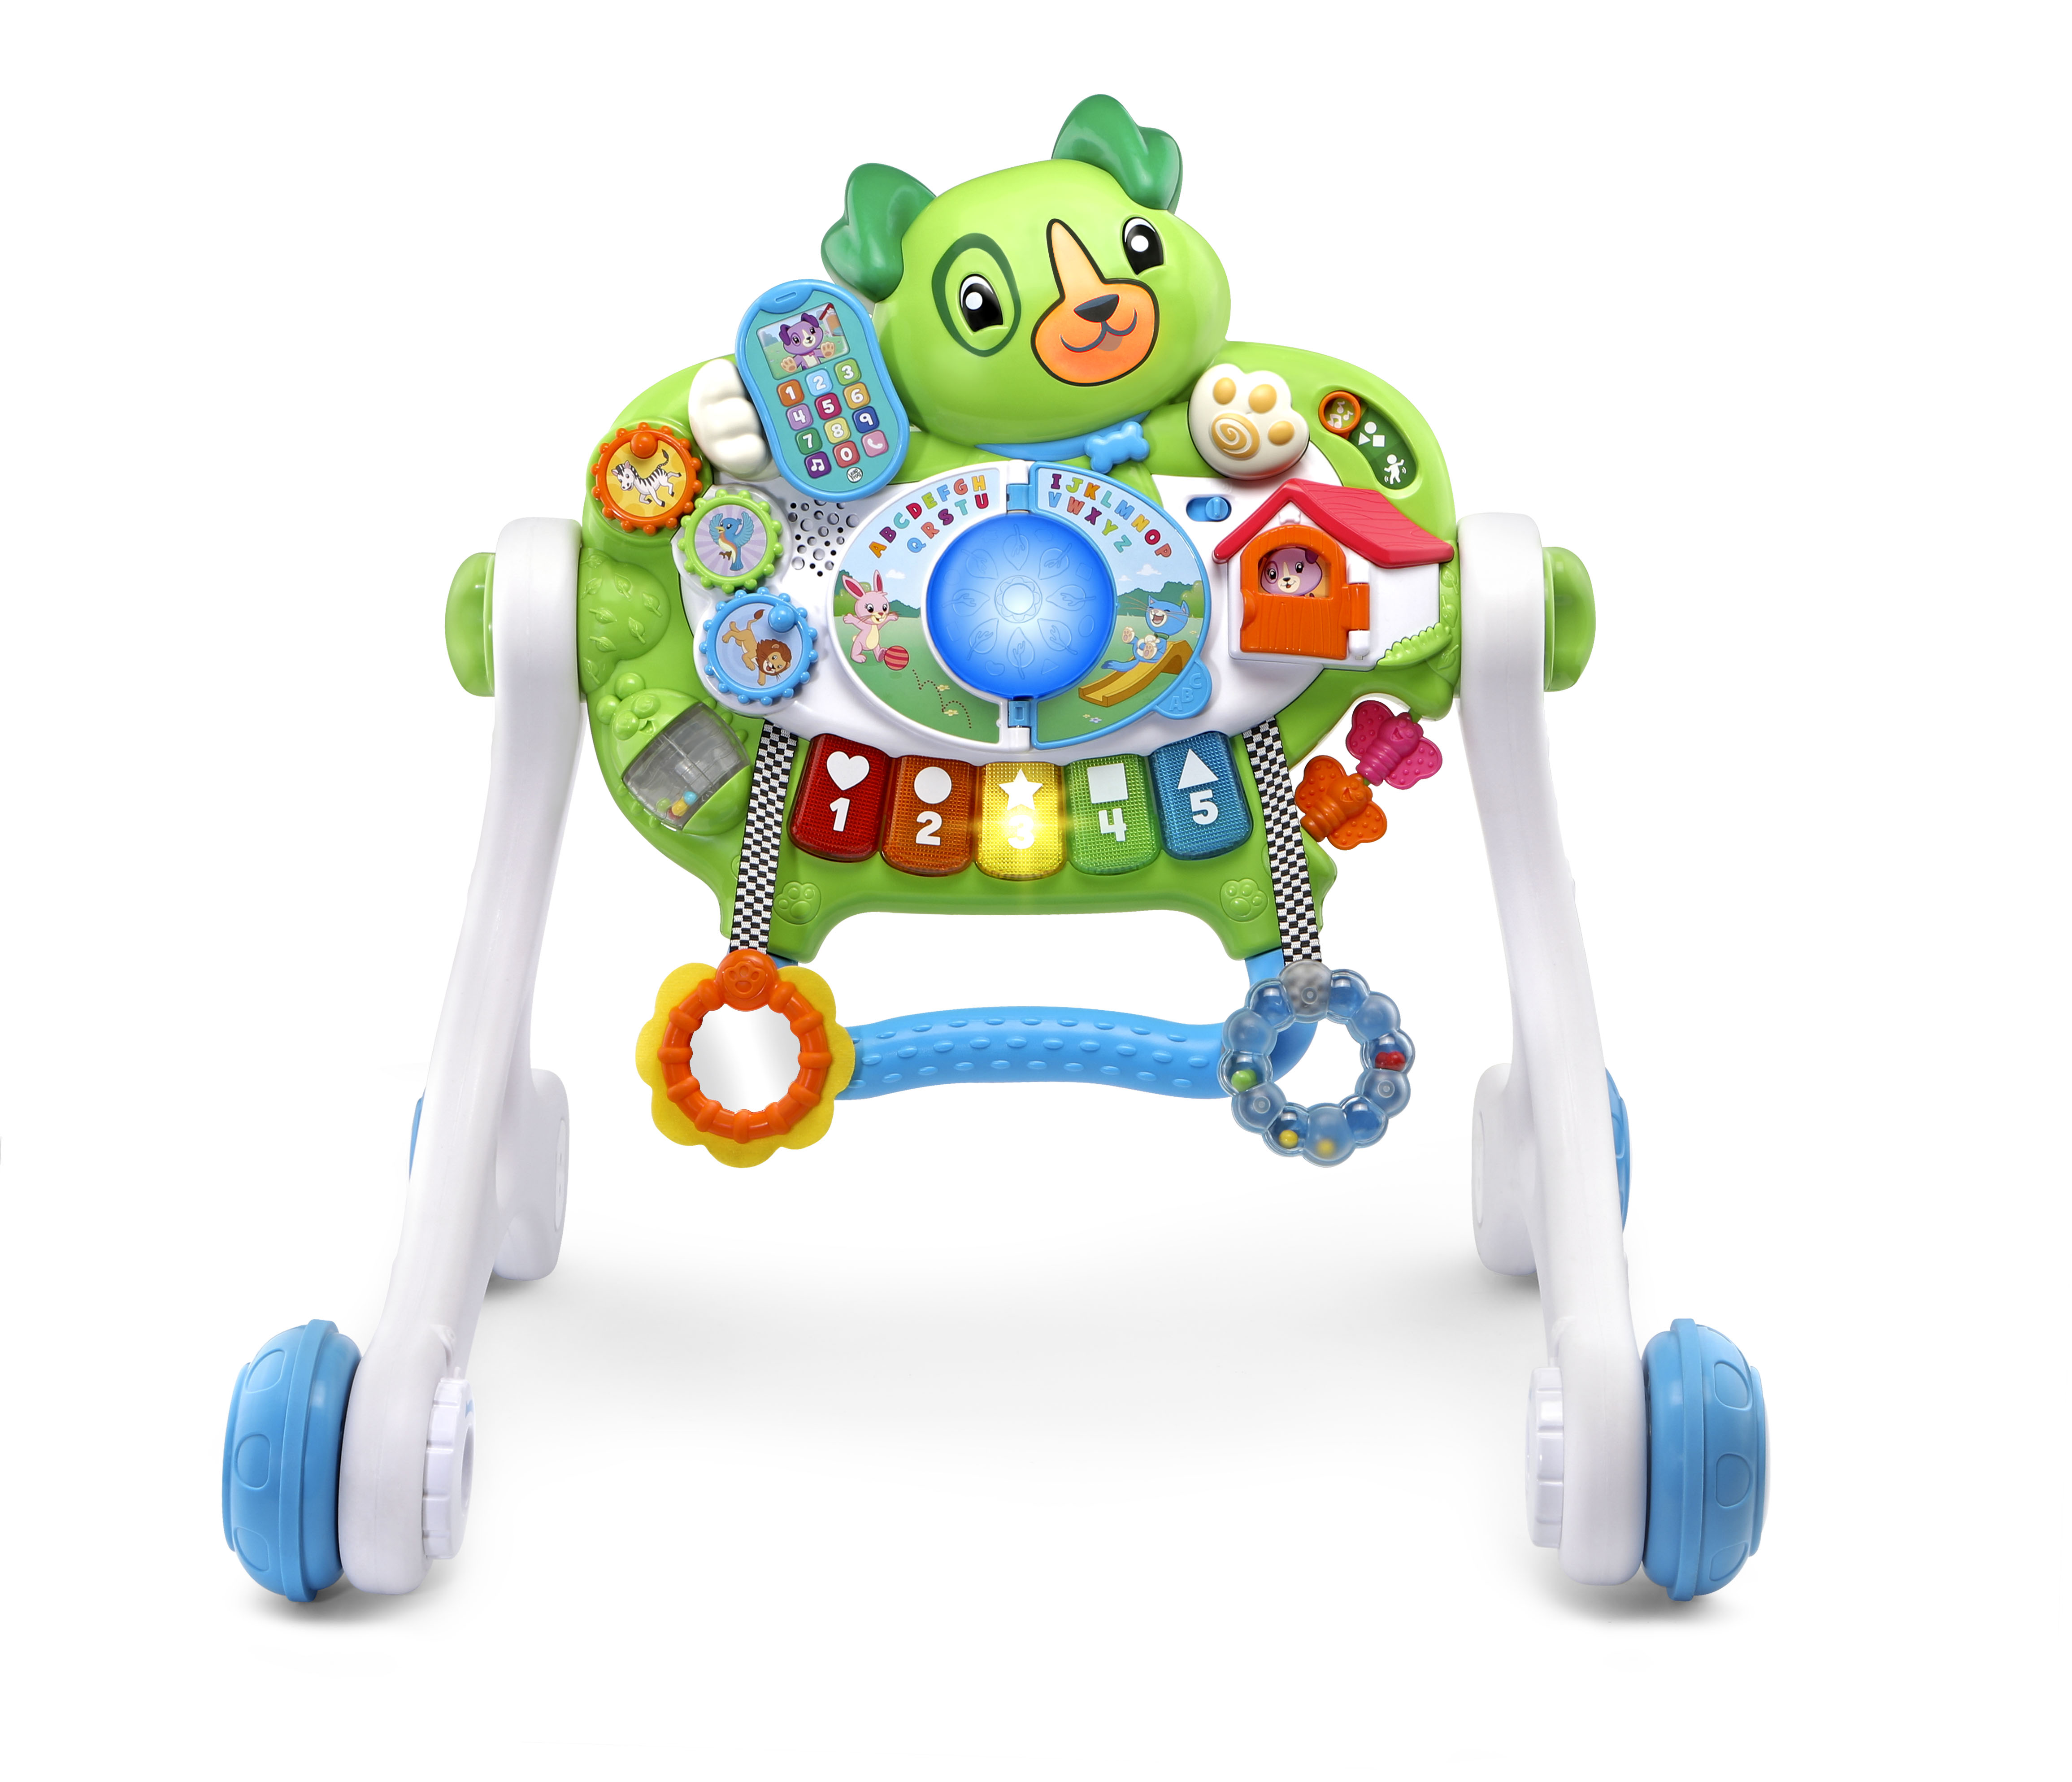 Scout's 3-in-1 Get Up and Go Walker, Baby Gym, Floor Play Toy, Green - image 1 of 11